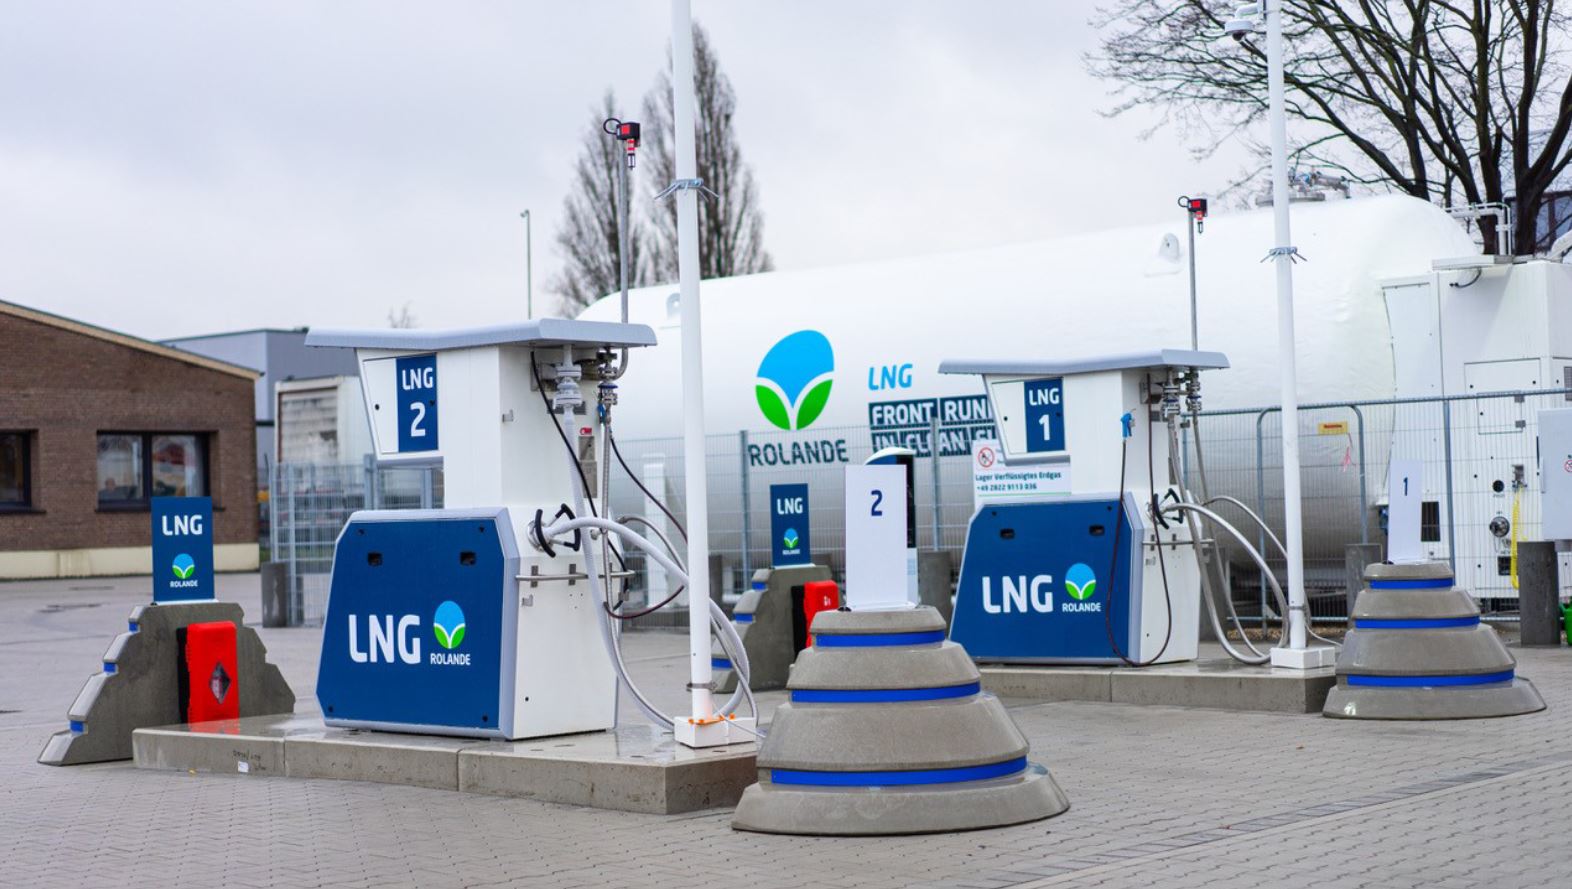 Rolande launches another German LNG station